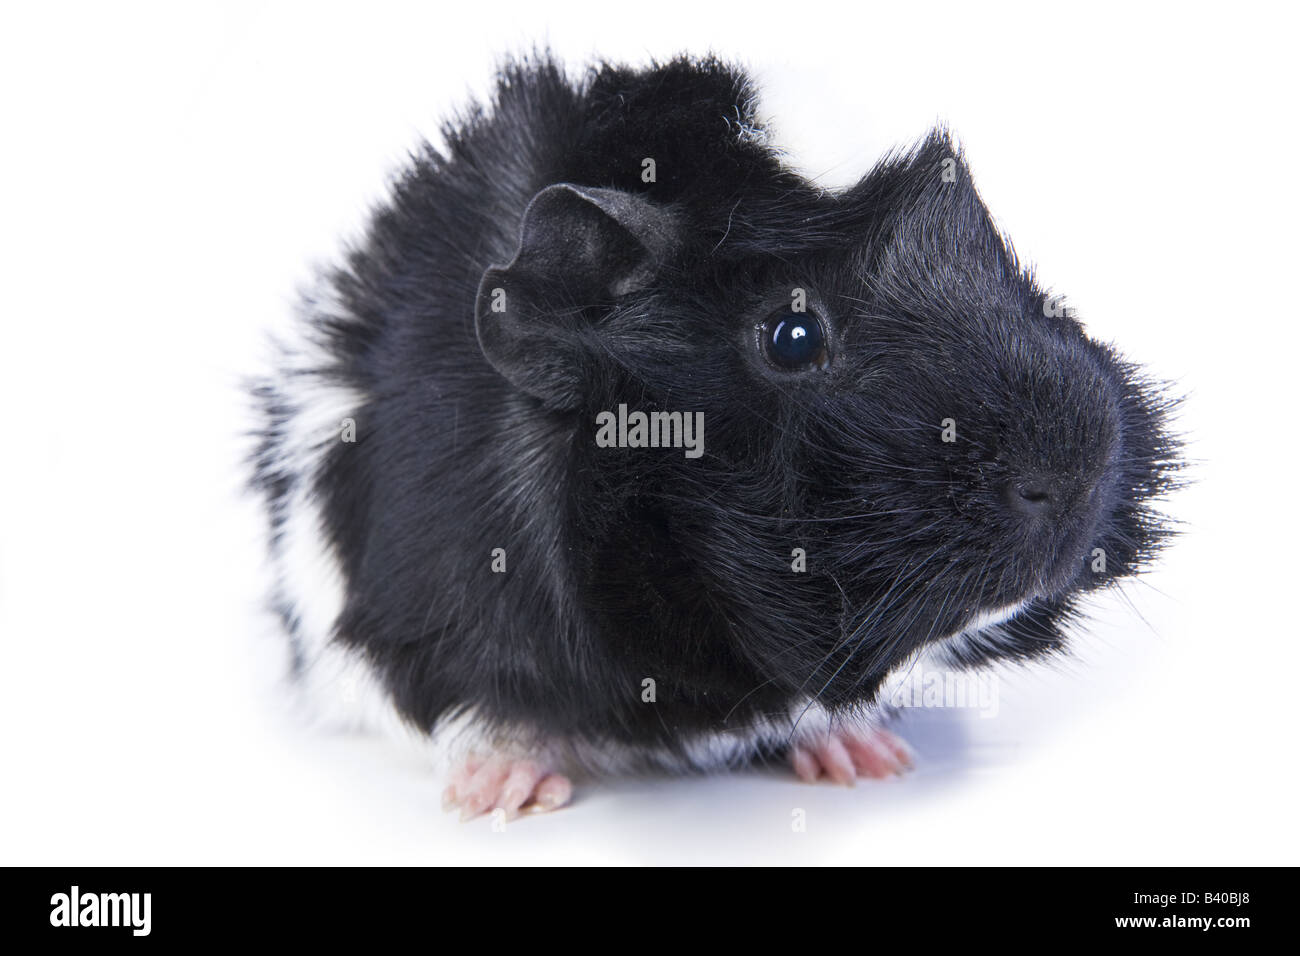 Black and white Abyssinian Guinea pig or Cavy isolated on white background Stock Photo